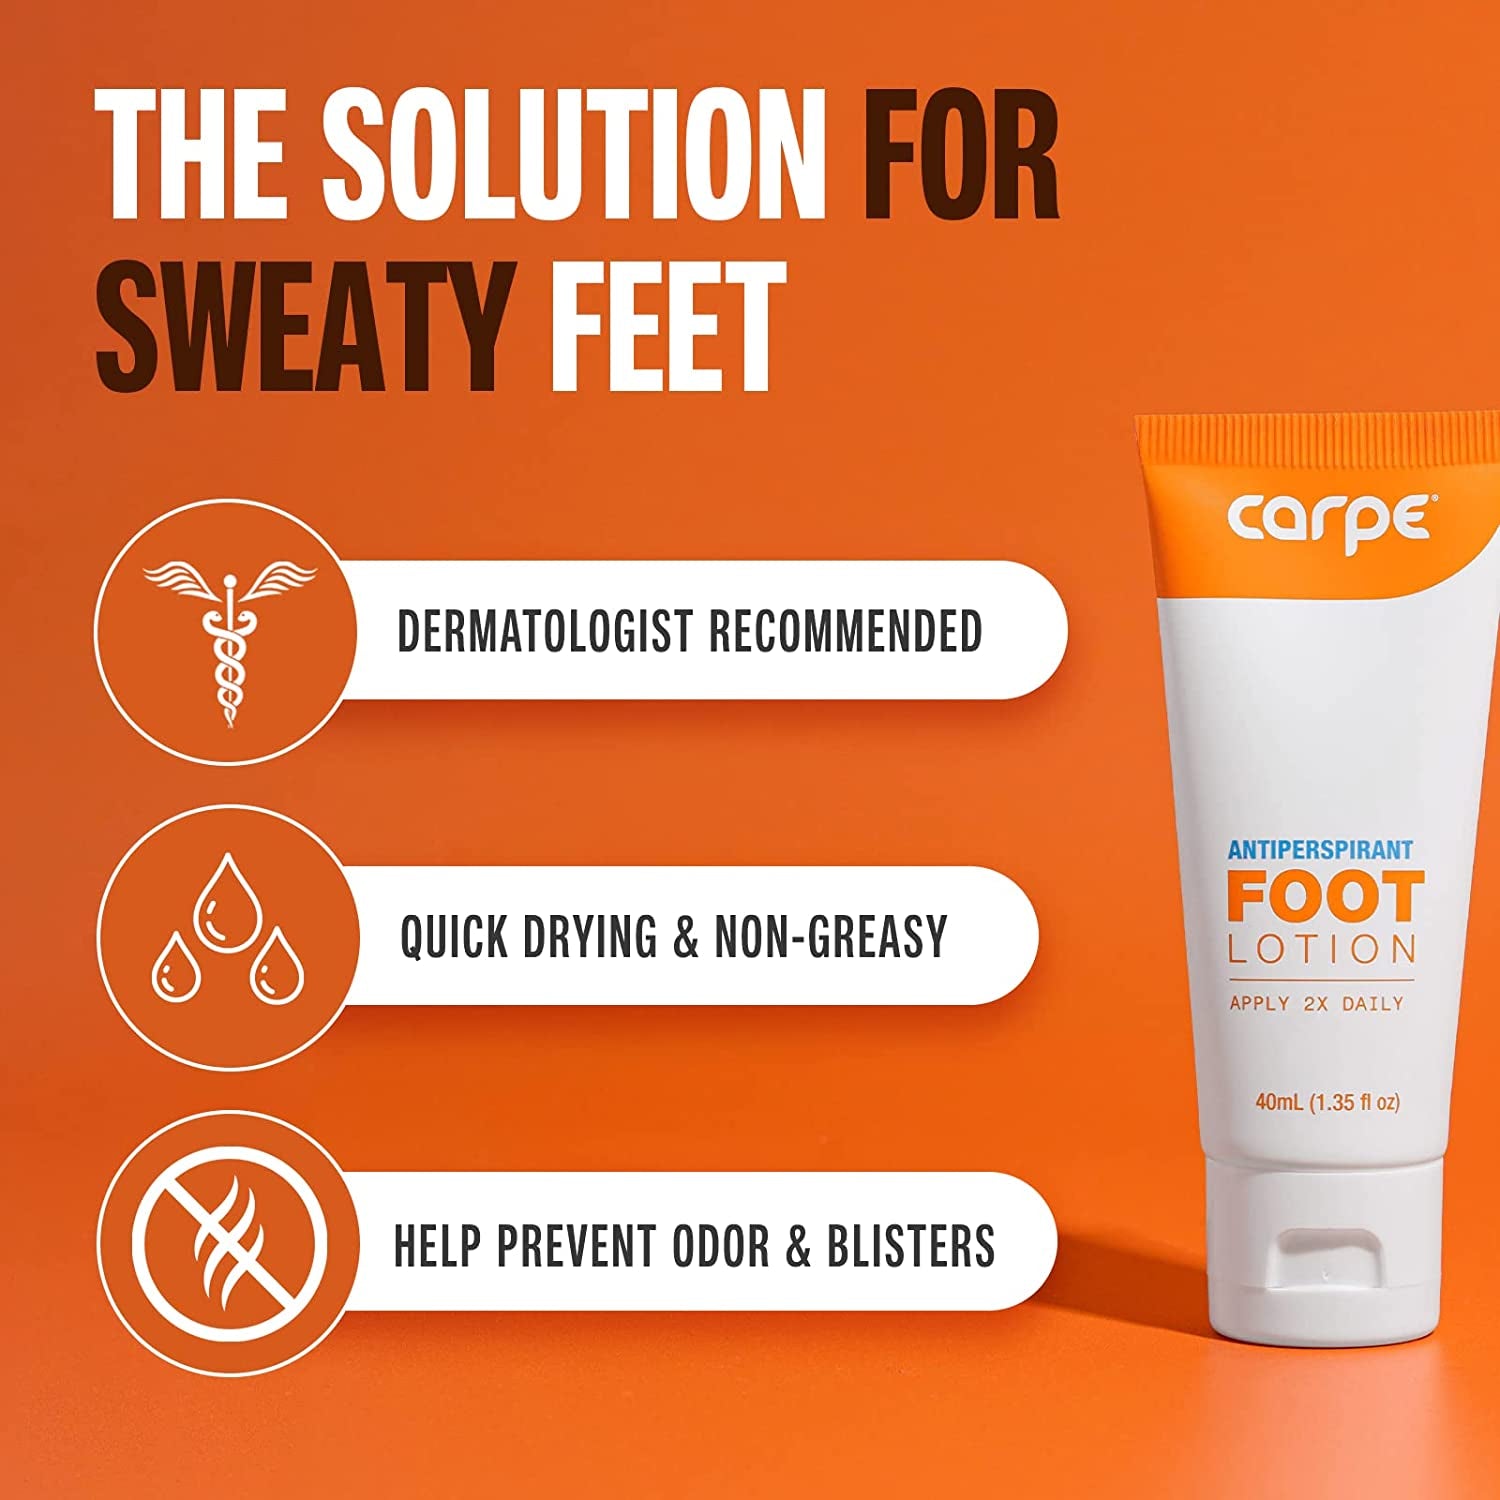 Dermatologist-Recommended Solution for Sweaty and Odorous Feet